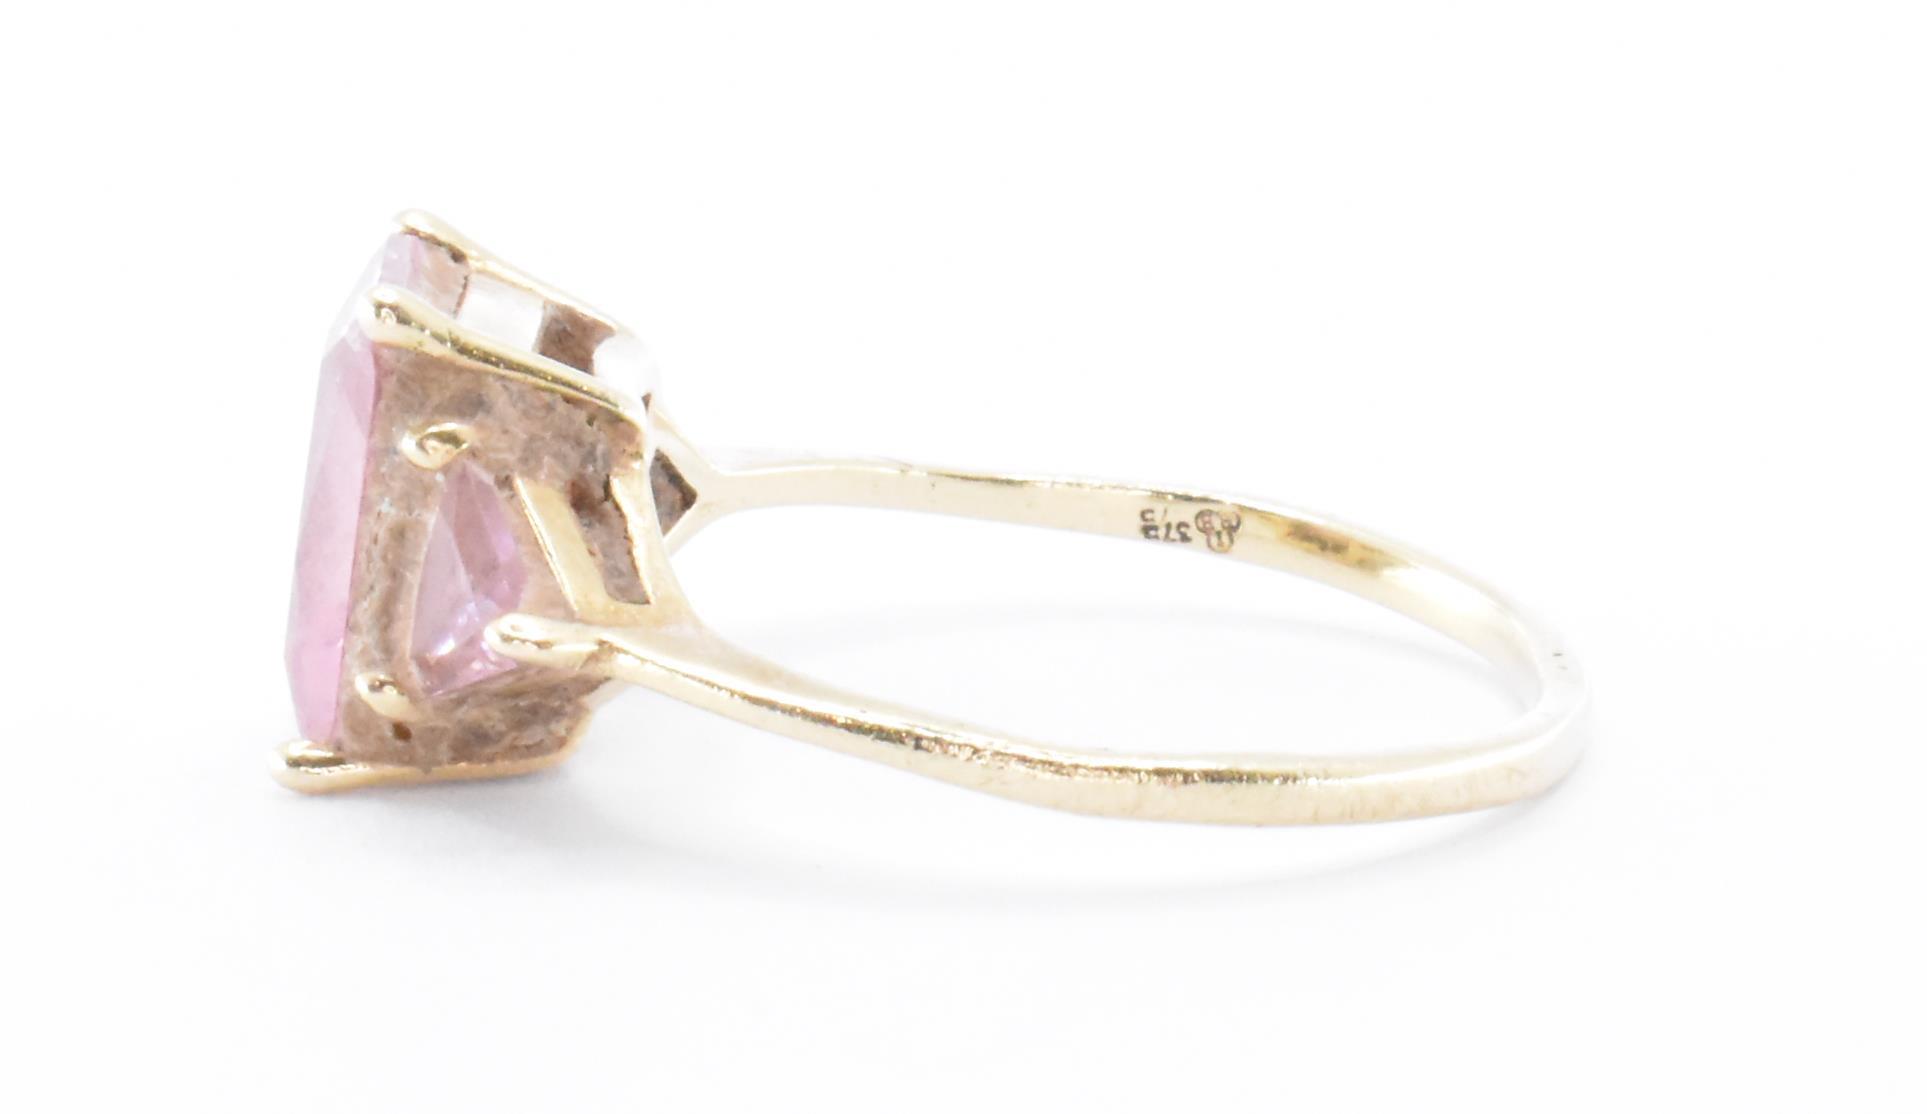 HALLMARKED 9CT GOLD & PINK STONE RING - Image 2 of 4